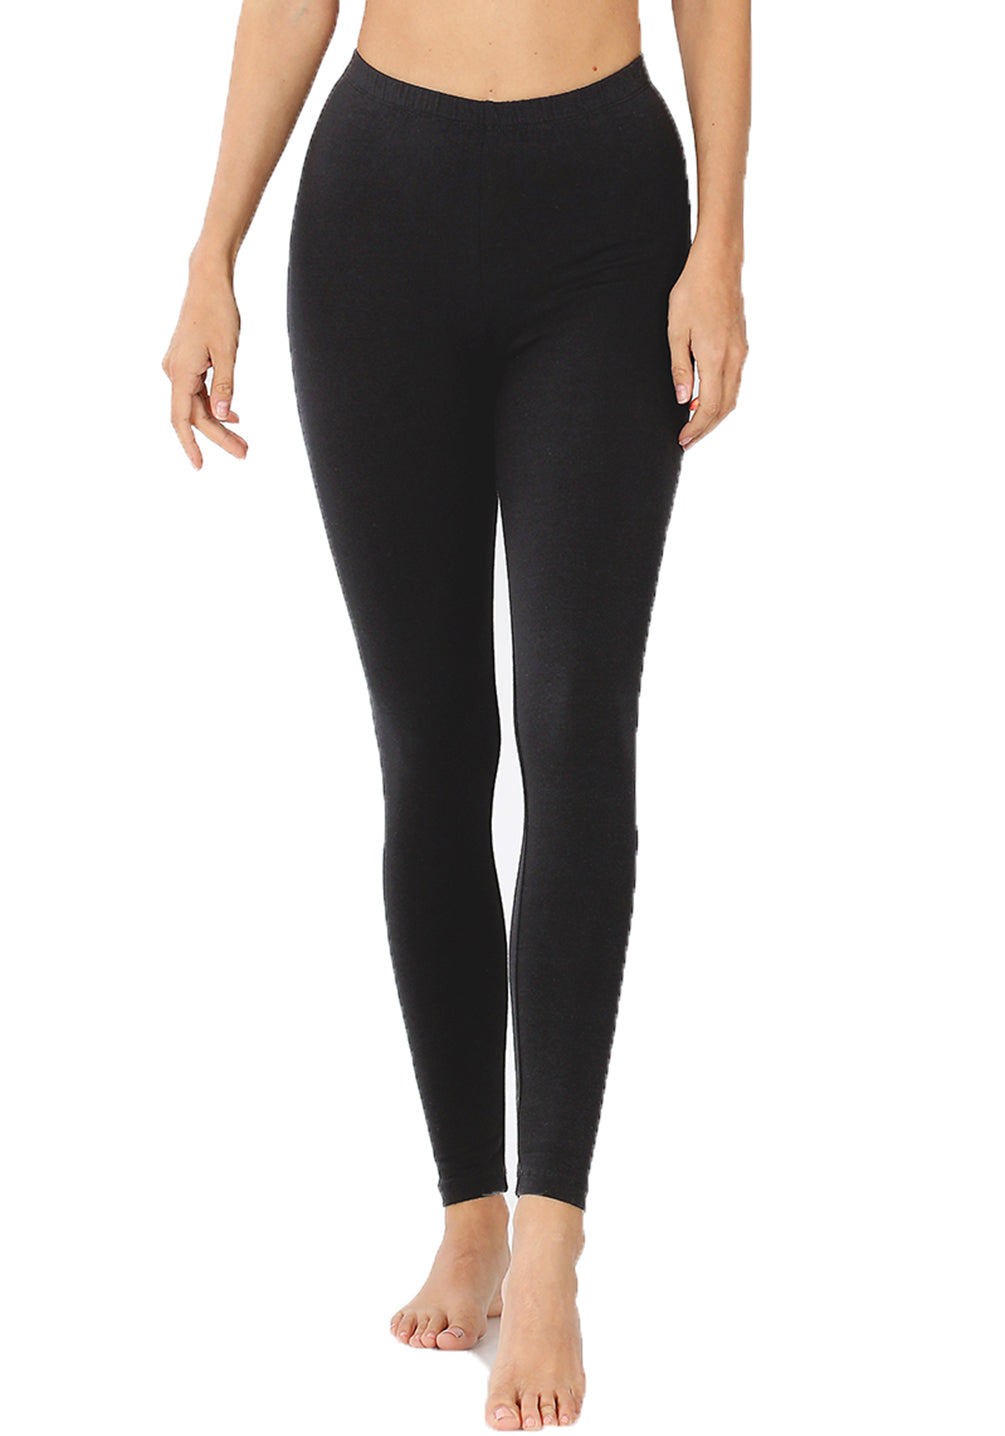 Full-Length Active Tights 2.0, Black